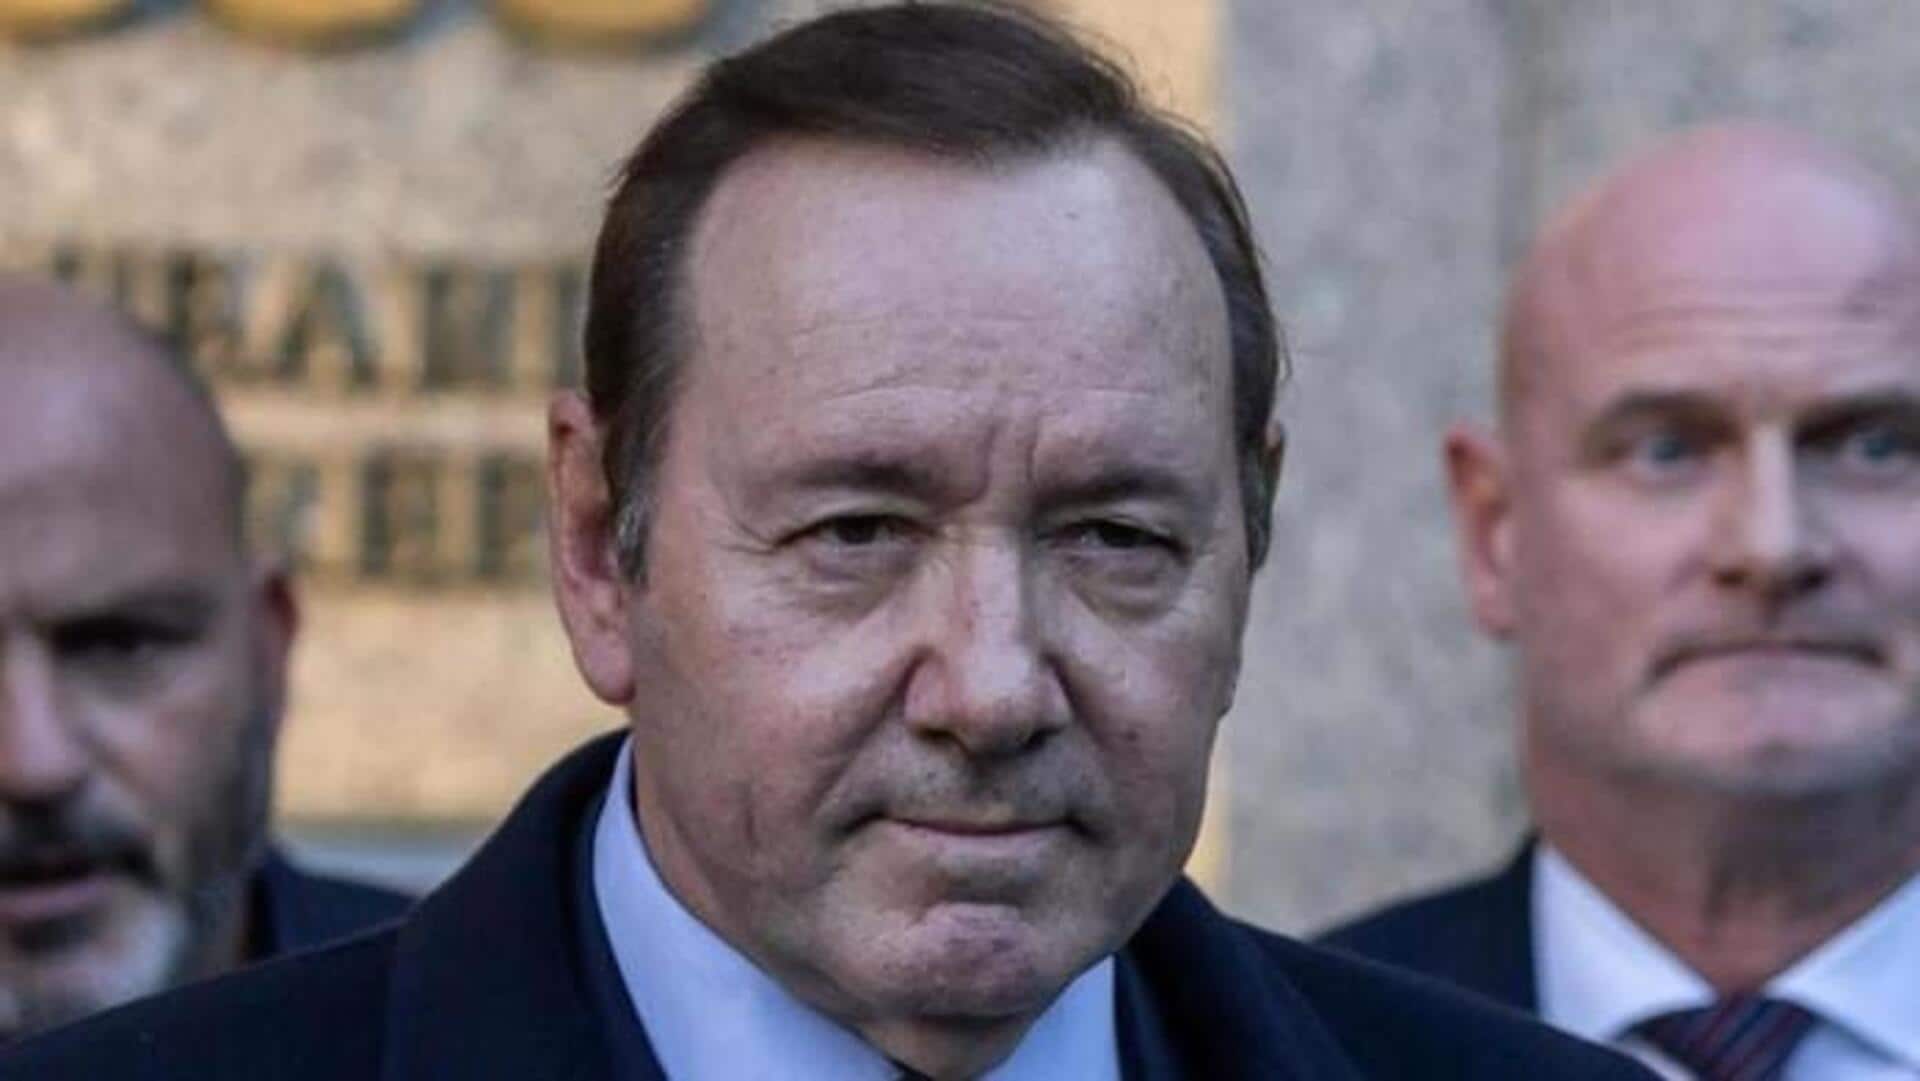 Kevin Spacey reportedly called a 'sexual bully' in court